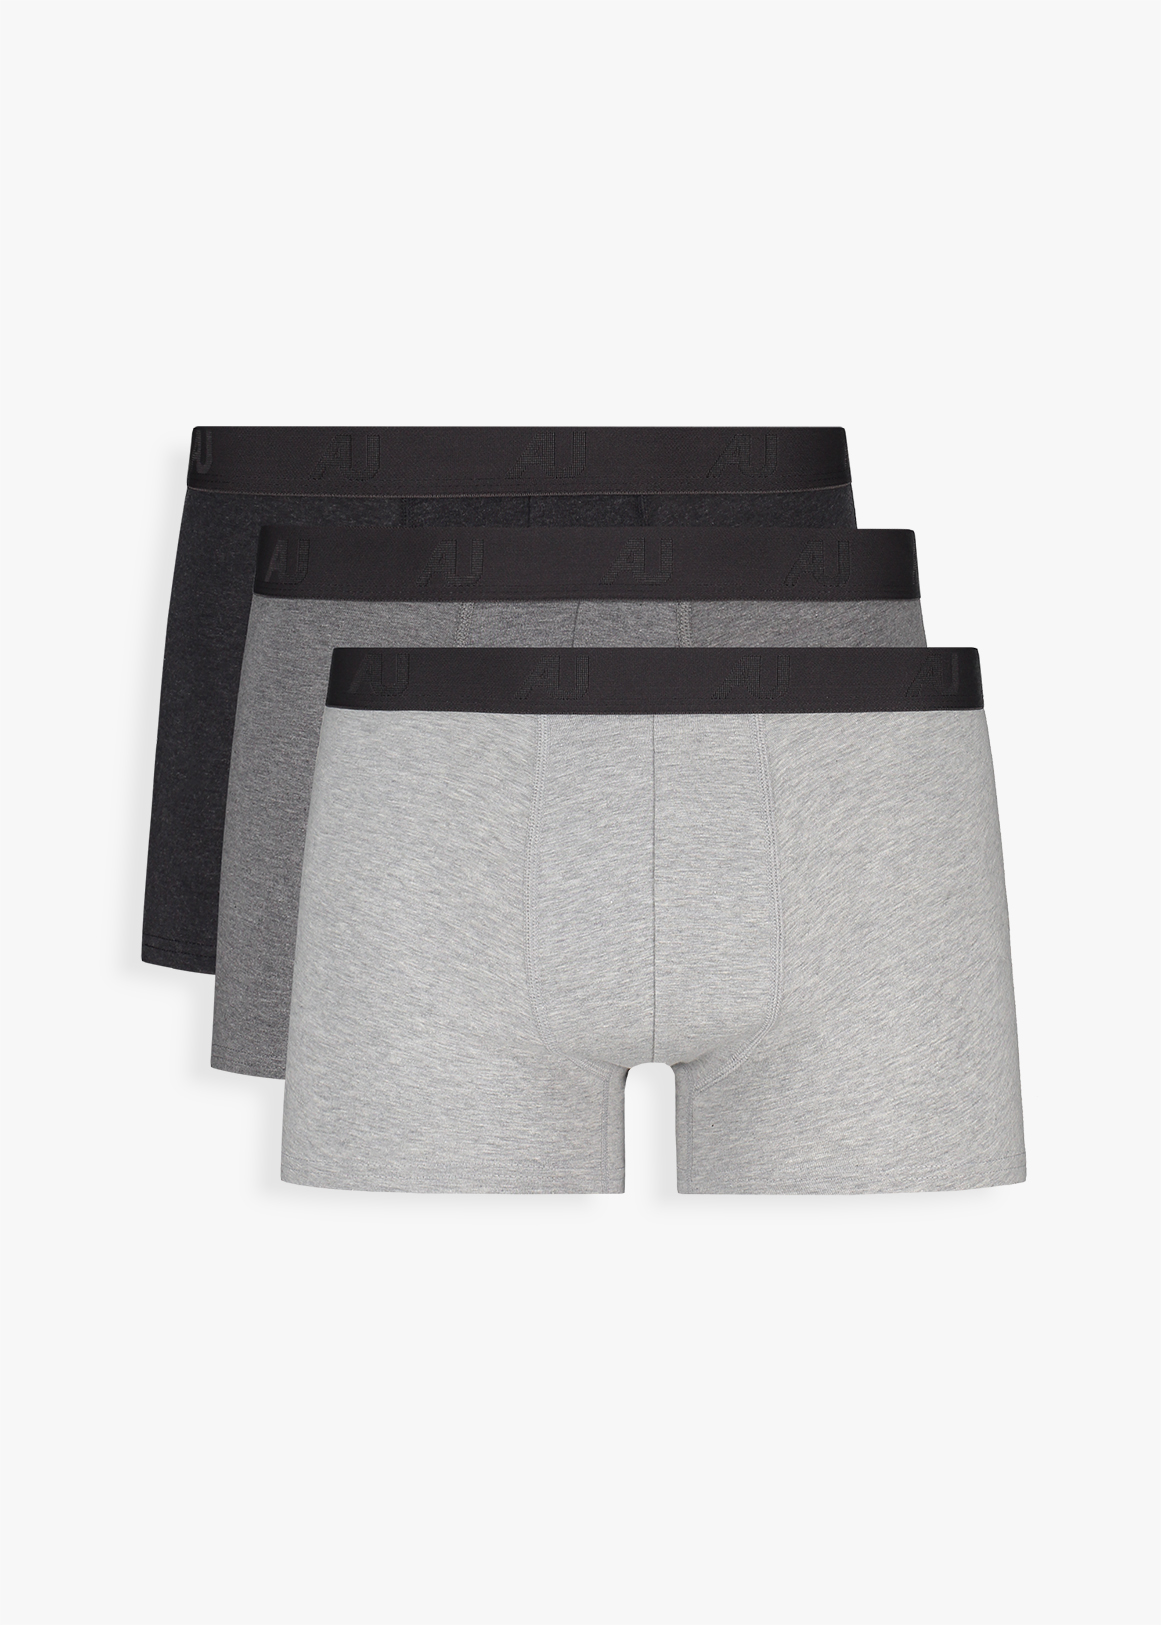 StayNew COOLTECH Stretch Cotton Trunks 3 Pack | Woolworths.co.za